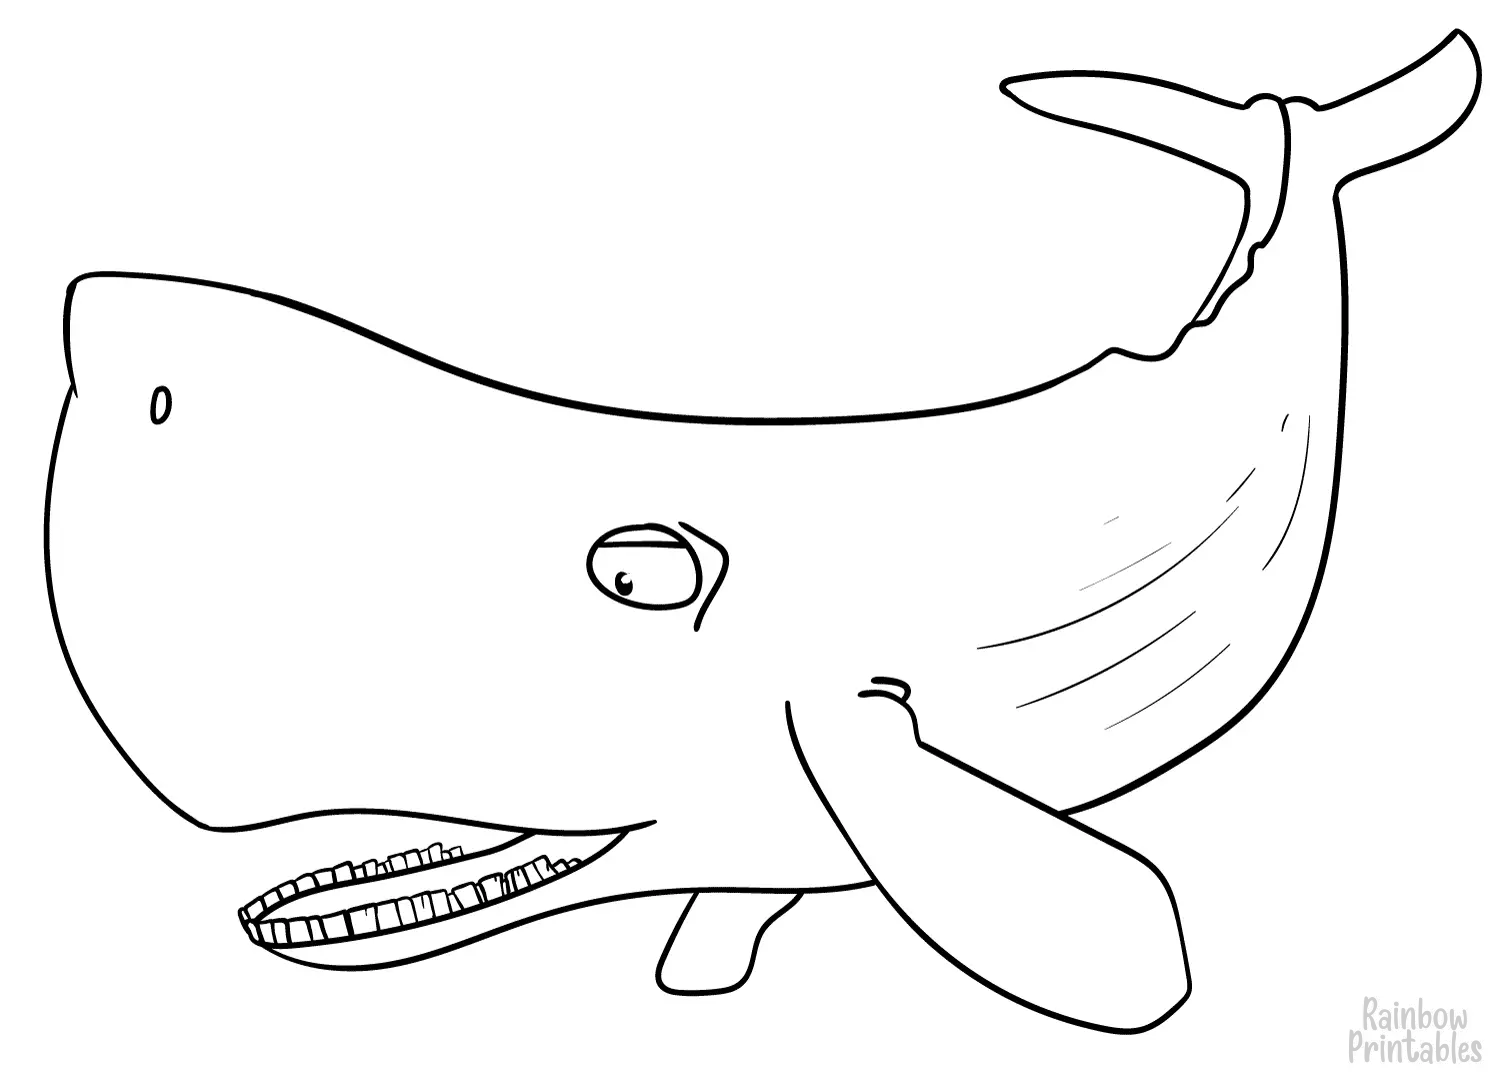 SIMPLE-EASY-line-drawings-WHALE-coloring-page-for-kids